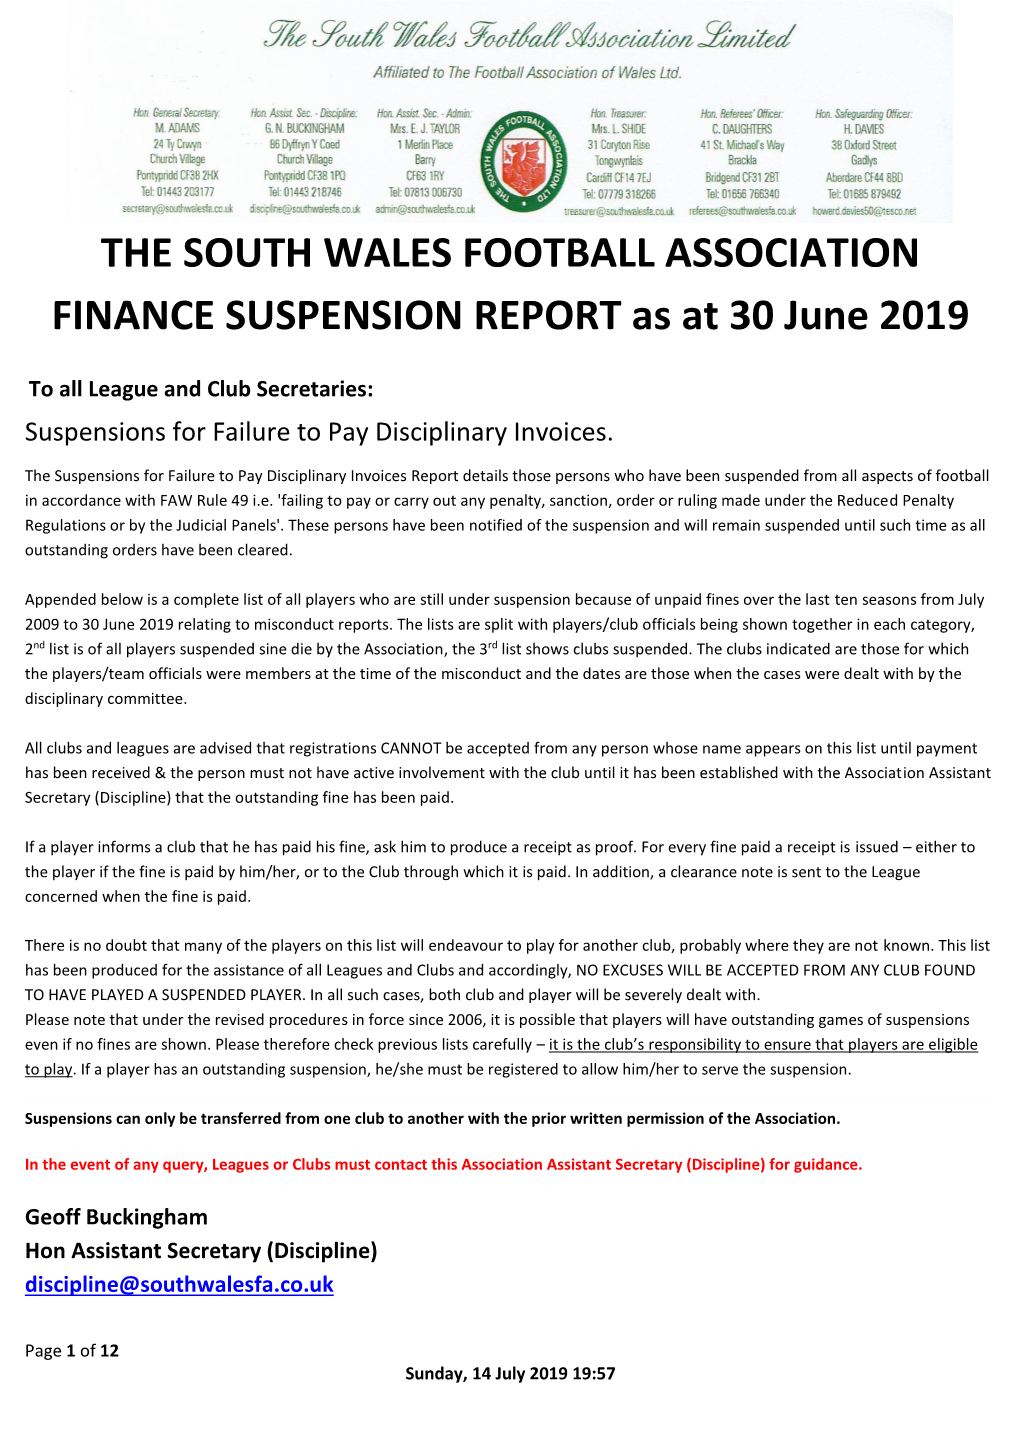 THE SOUTH WALES FOOTBALL ASSOCIATION FINANCE SUSPENSION REPORT As at 30 June 2019